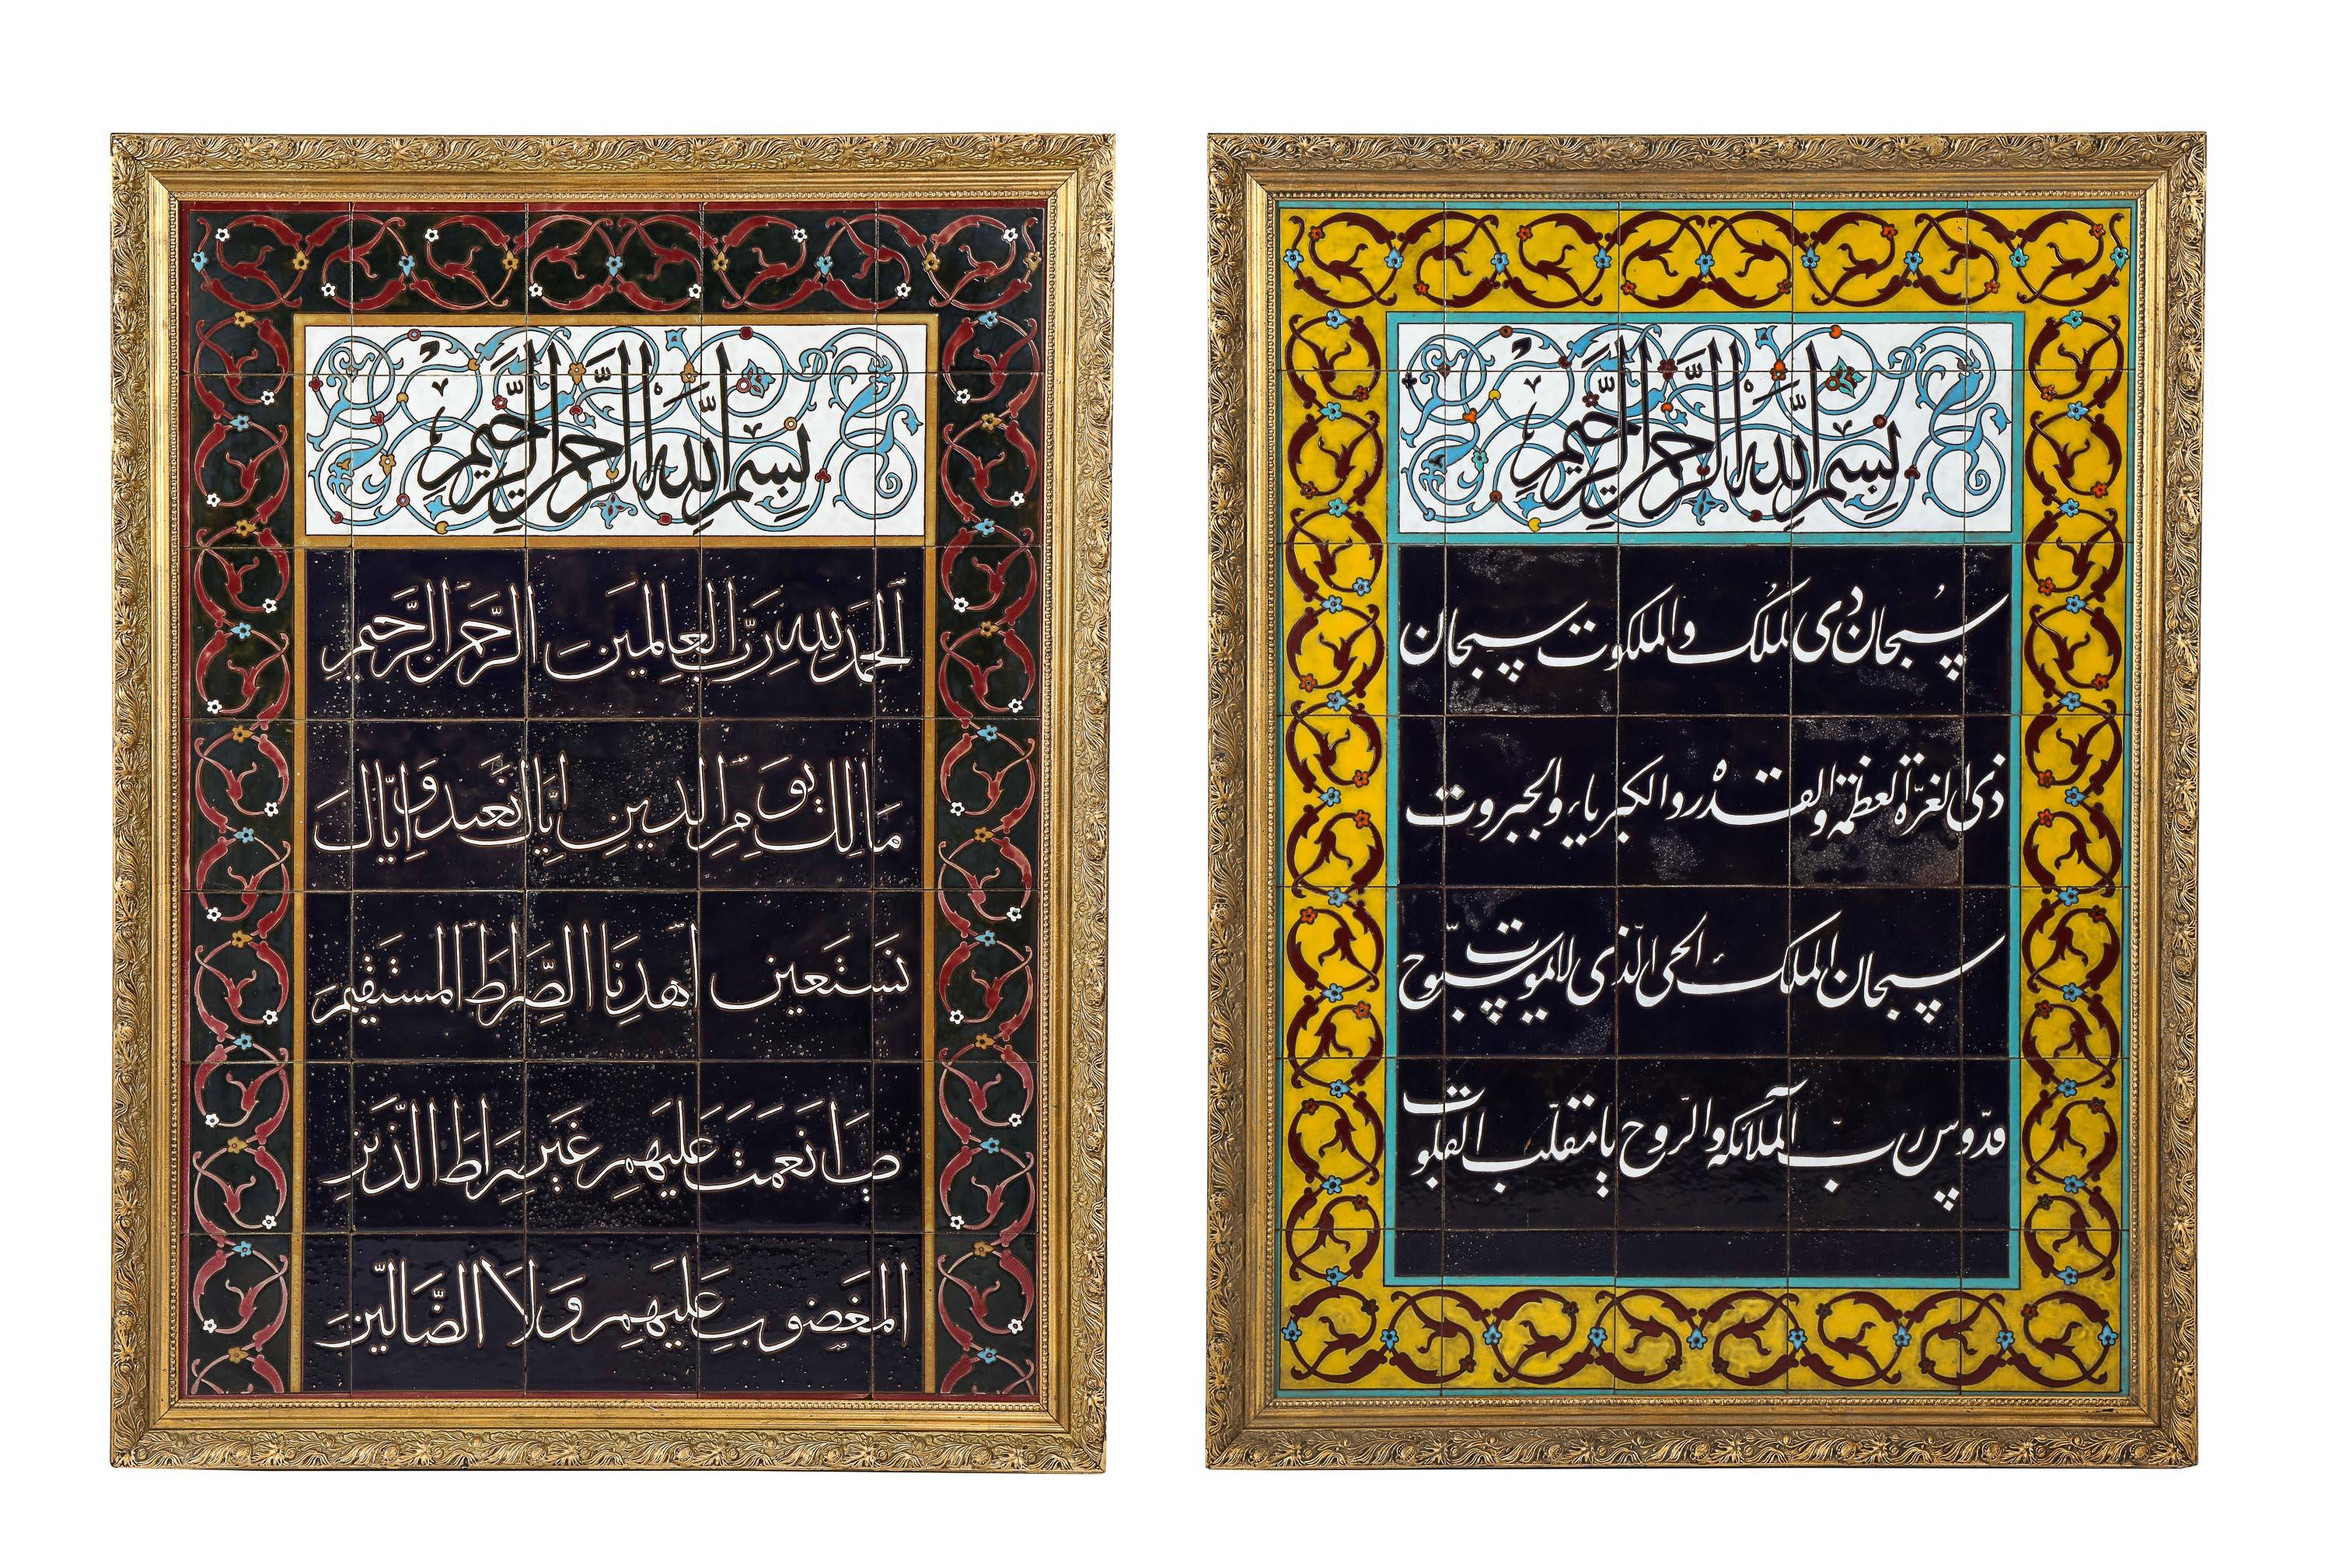 An Exceptional Pair of Islamic Middle Eastern Ceramic Tiles with Quran Verses  - Art by Unknown